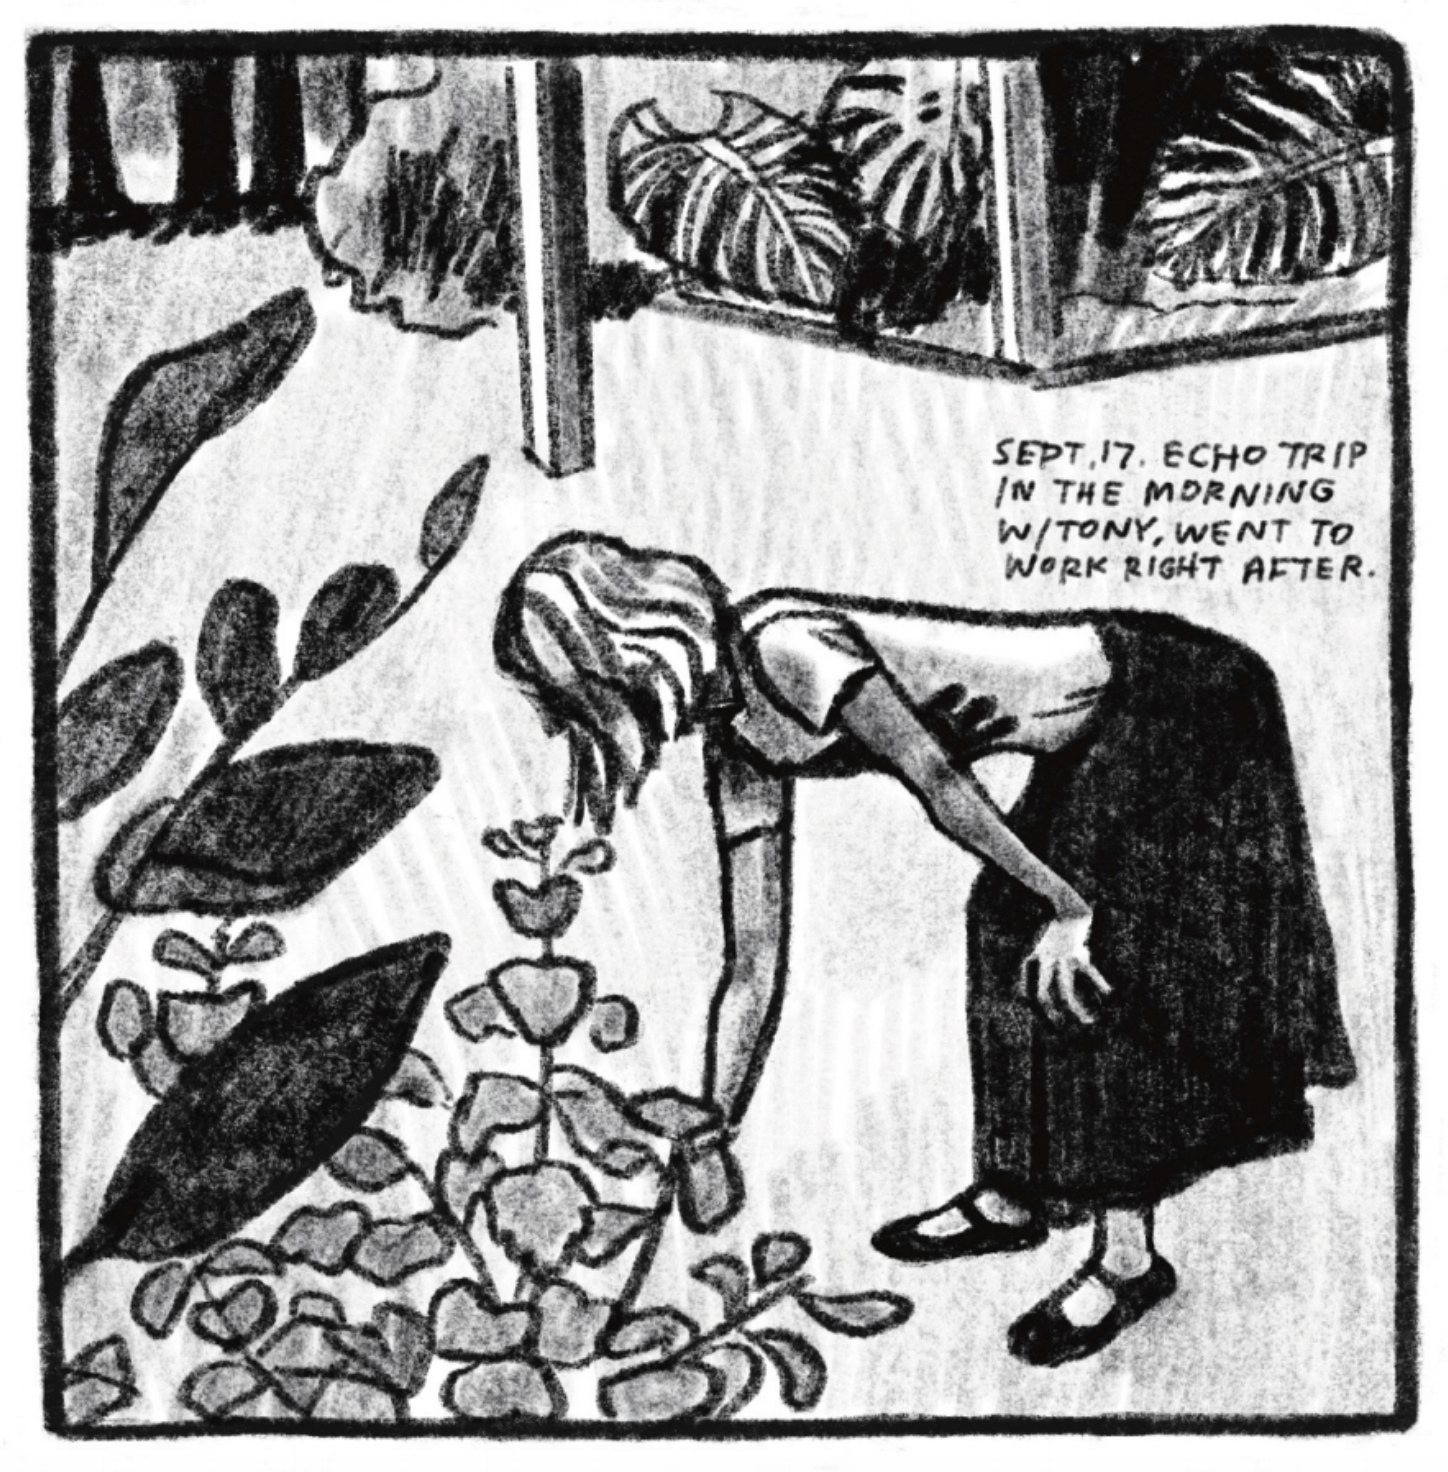 Kim is standing outside, bending over at a right angle so her back is parallel to the ground, touching the leaf of a pretty plant. She is wearing a graphic T and a long skirt, along with mary janes. In the background are more cool looking plants, including some with large, tropical leaves, and wooden posts. â€œSeptember 17. Echo trip in the morning with Tony. Went to work right after.â€